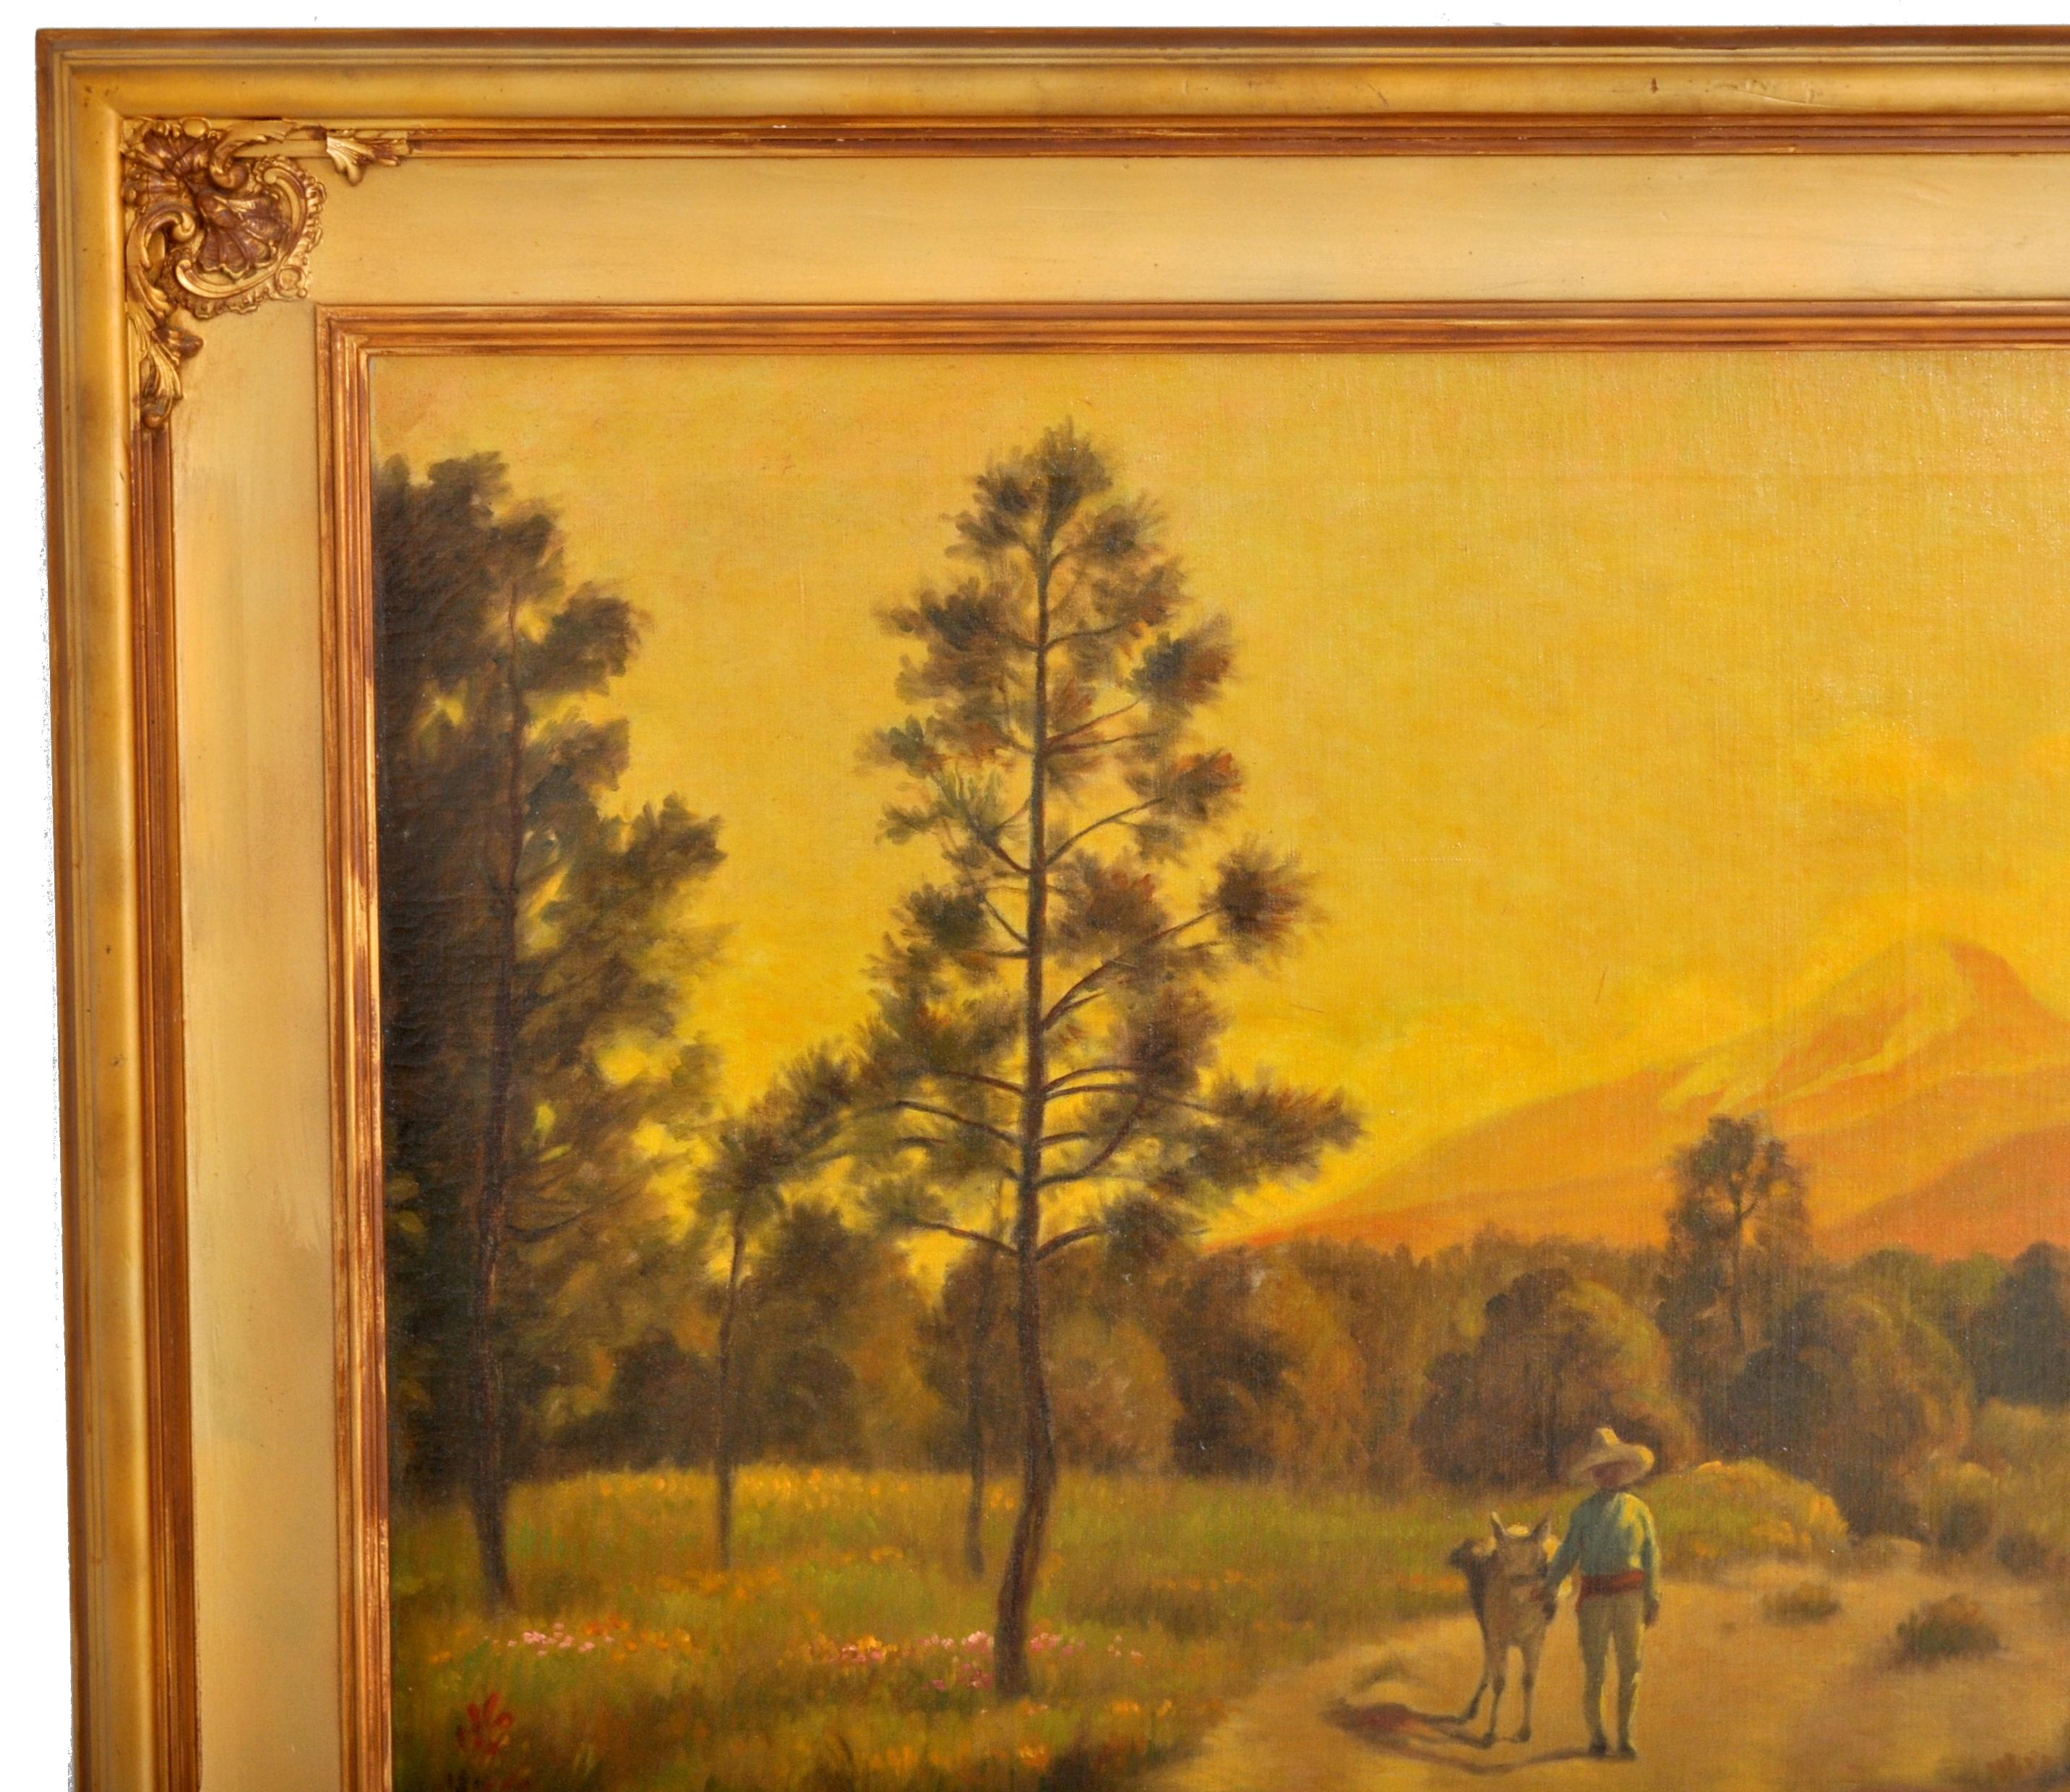 Antique American Oil on Canvas by Charles Holloway South American Landscape 1915 For Sale 3